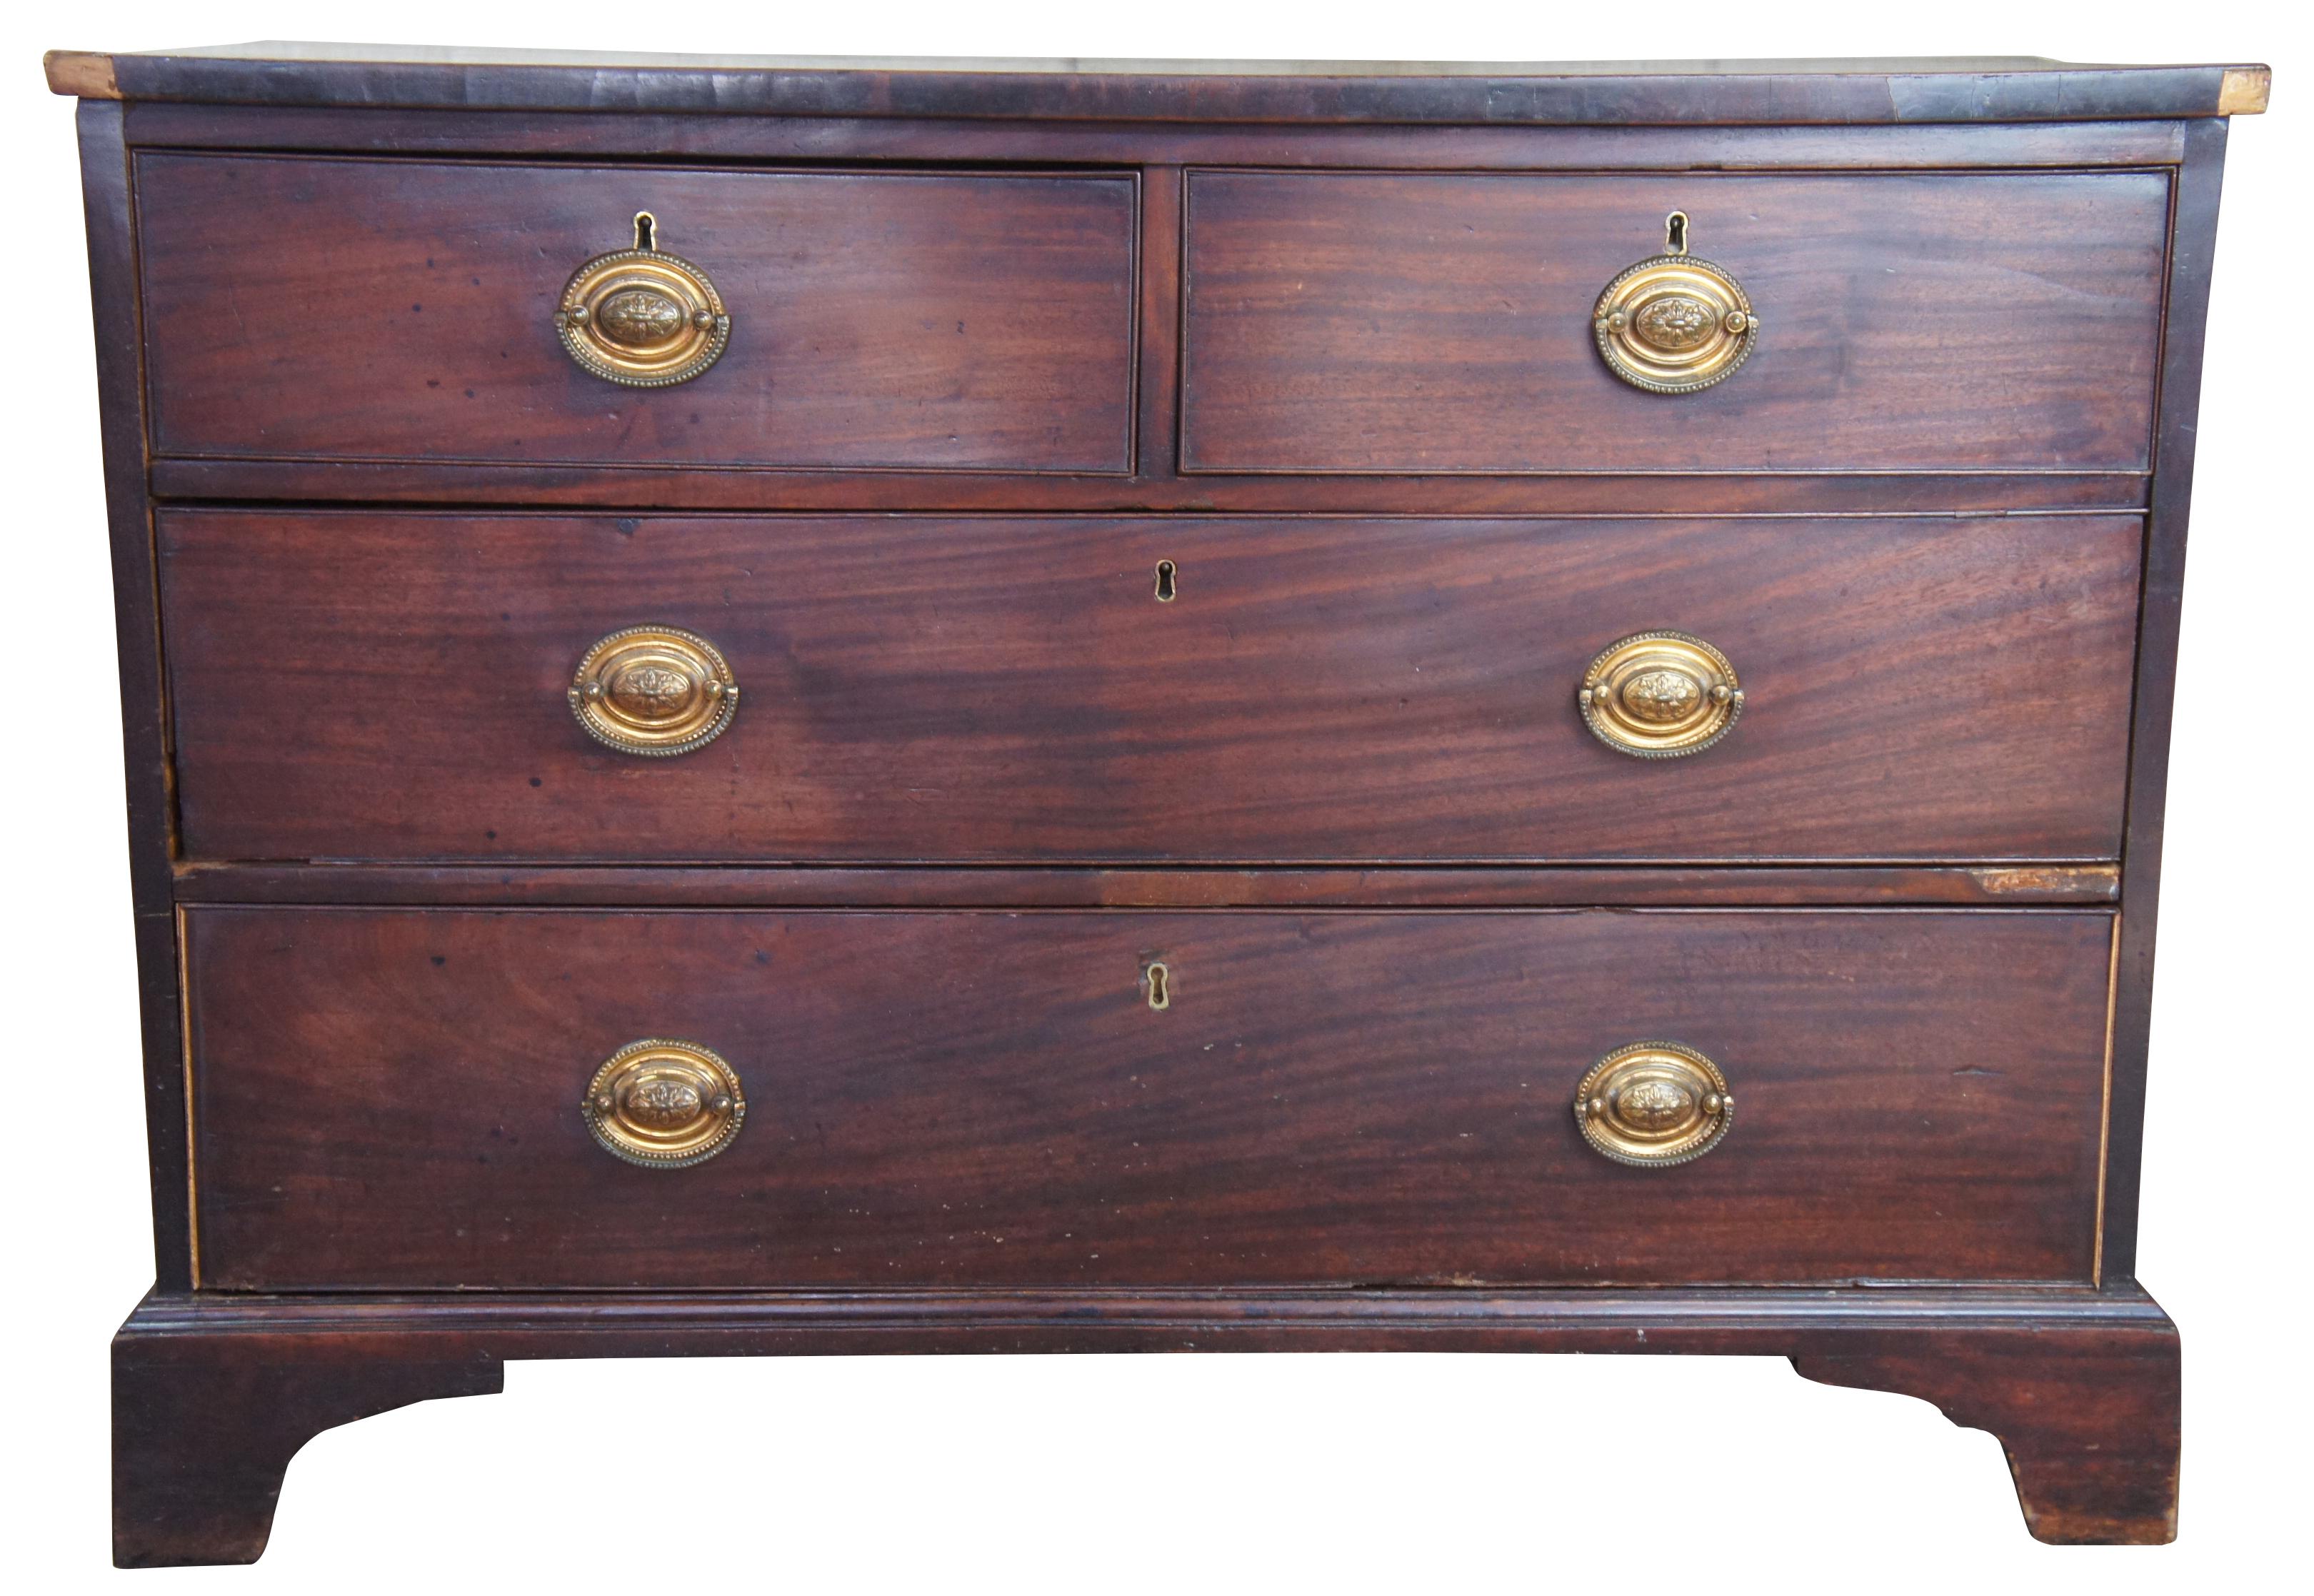 18th century mahogany Georgian chest of drawers antique English dresser

Made from mahogany with four drawers, featuring brass hardware over bracket feet.